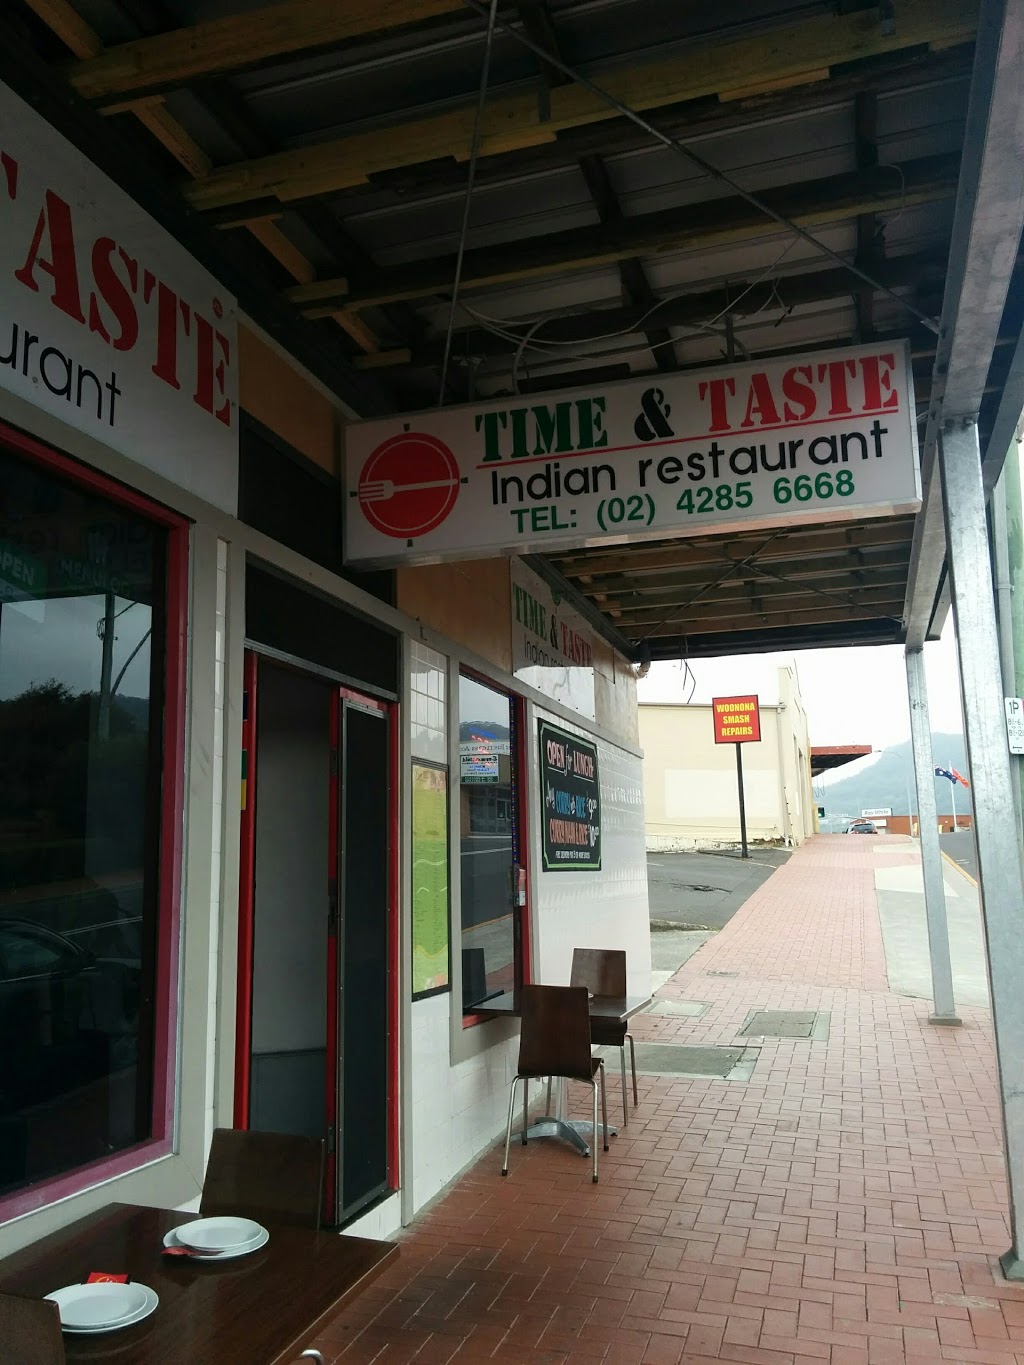 Time and Taste Indian Restaurant | meal delivery | 347-349 Princes Hwy, Woonona NSW 2517, Australia | 0242856668 OR +61 2 4285 6668